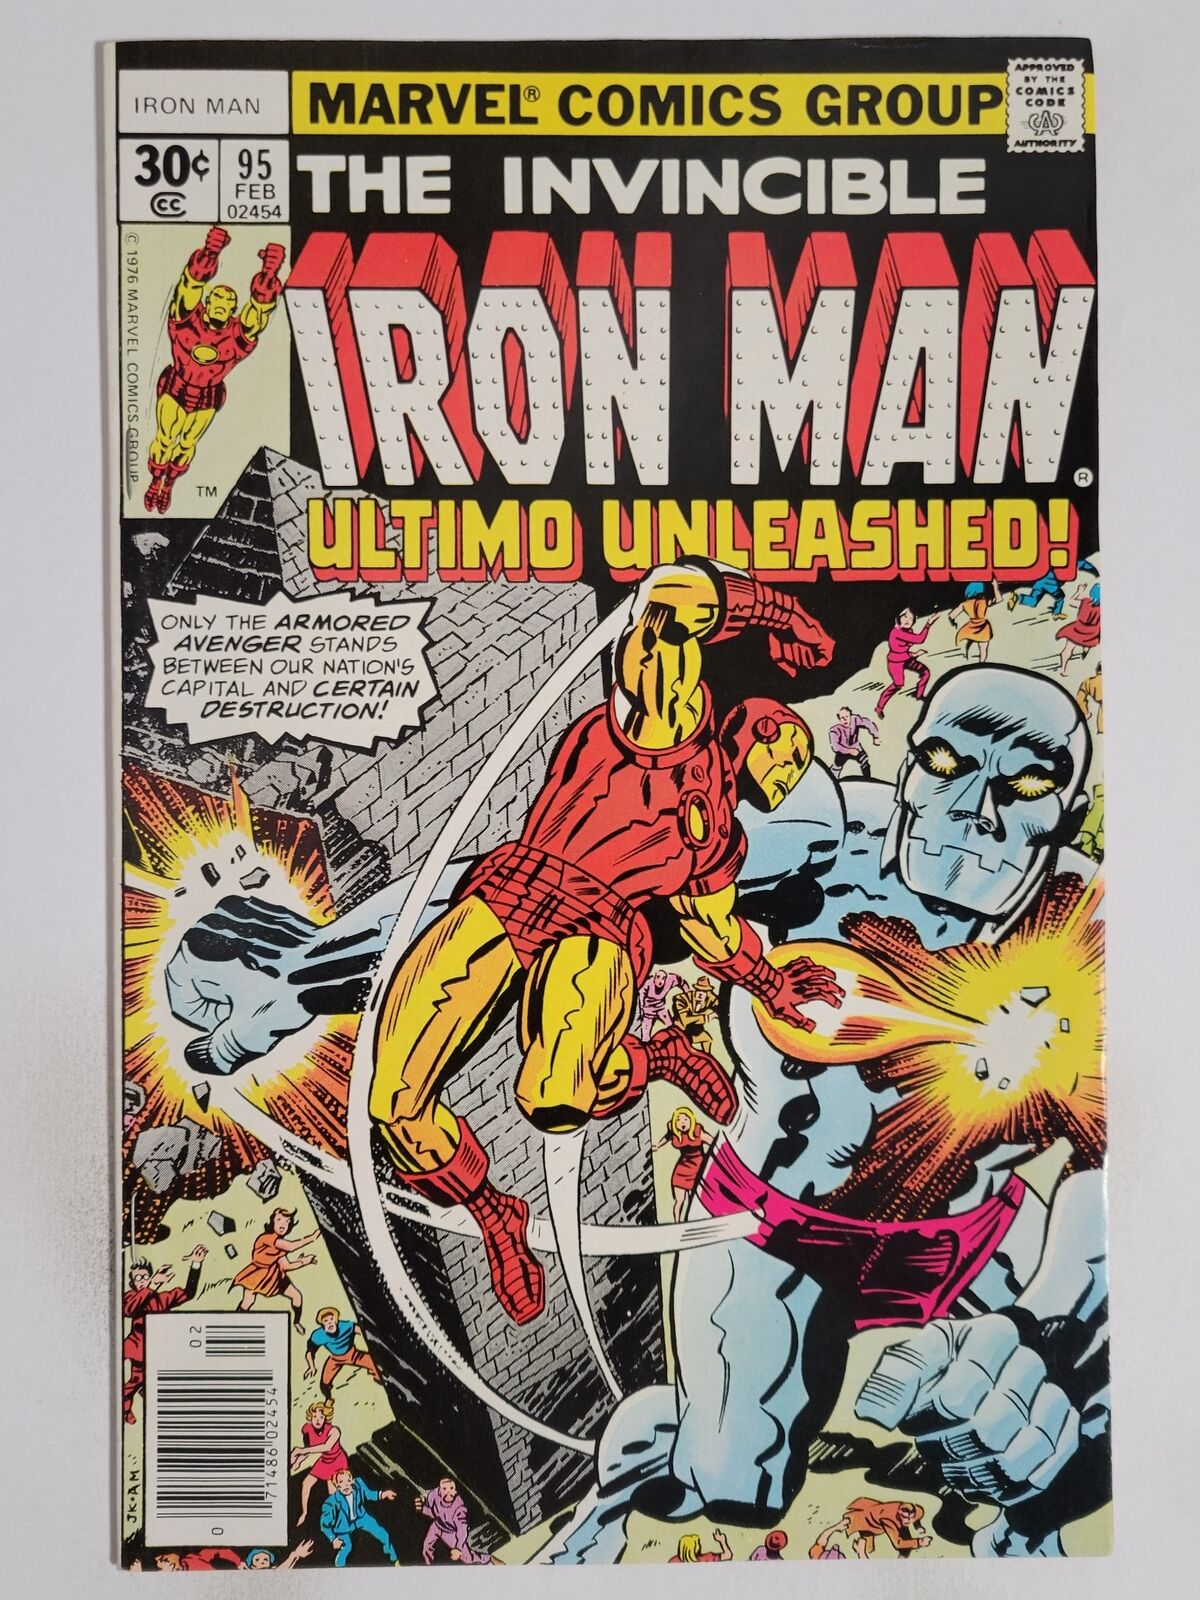 IRON MAN #95 (VF) 1977 ULTIMO COVER & APPEARANCE! BRONZE AGE MARVEL COMICS